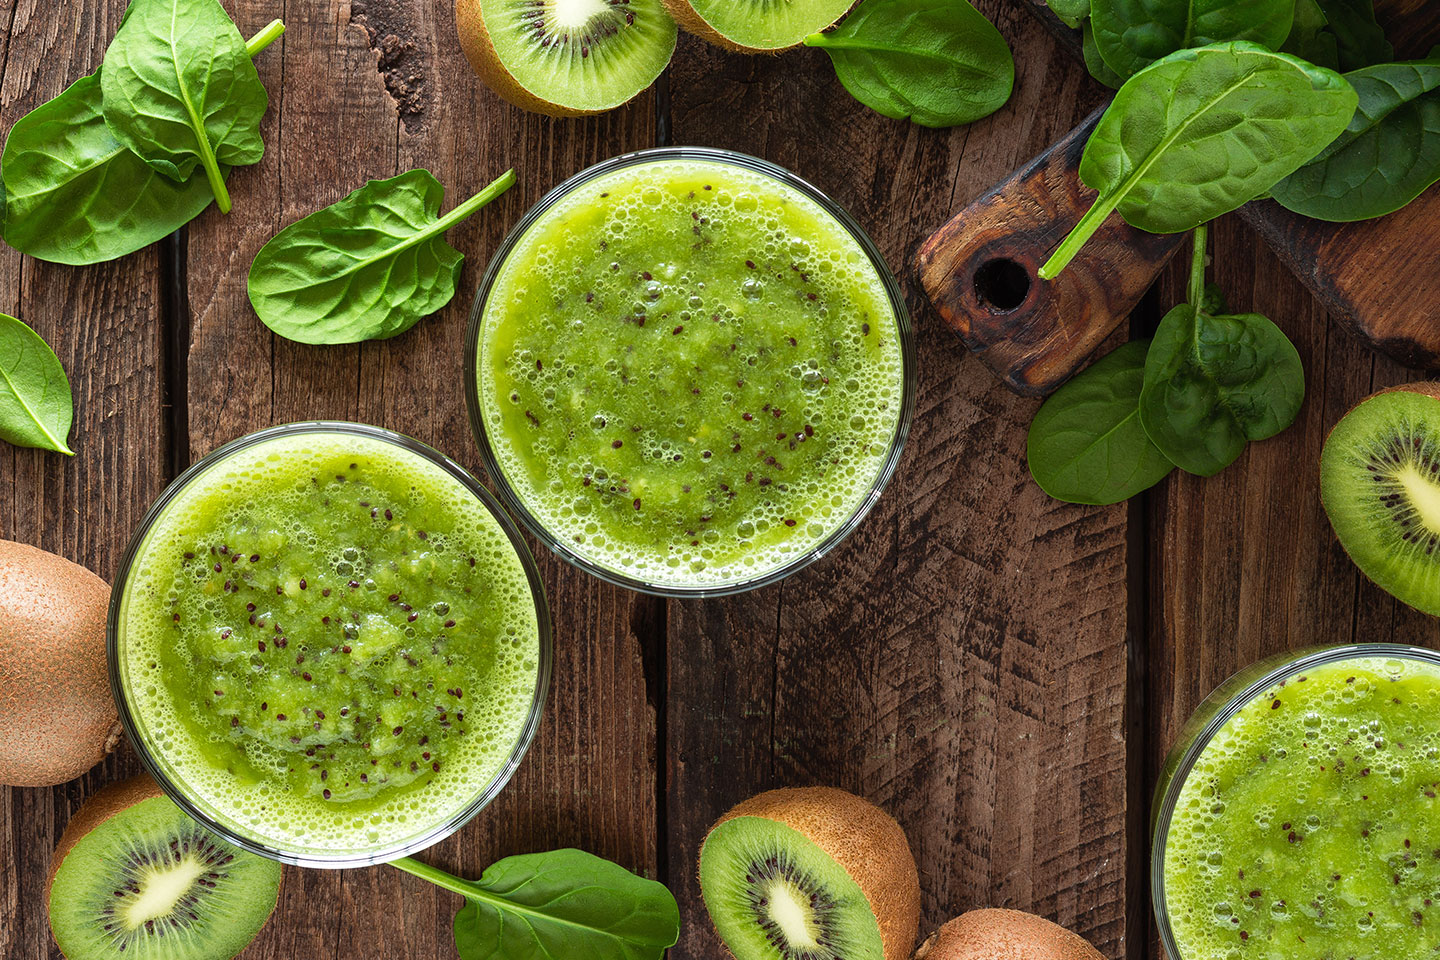 The 5 main benefits of green vegetable drinks